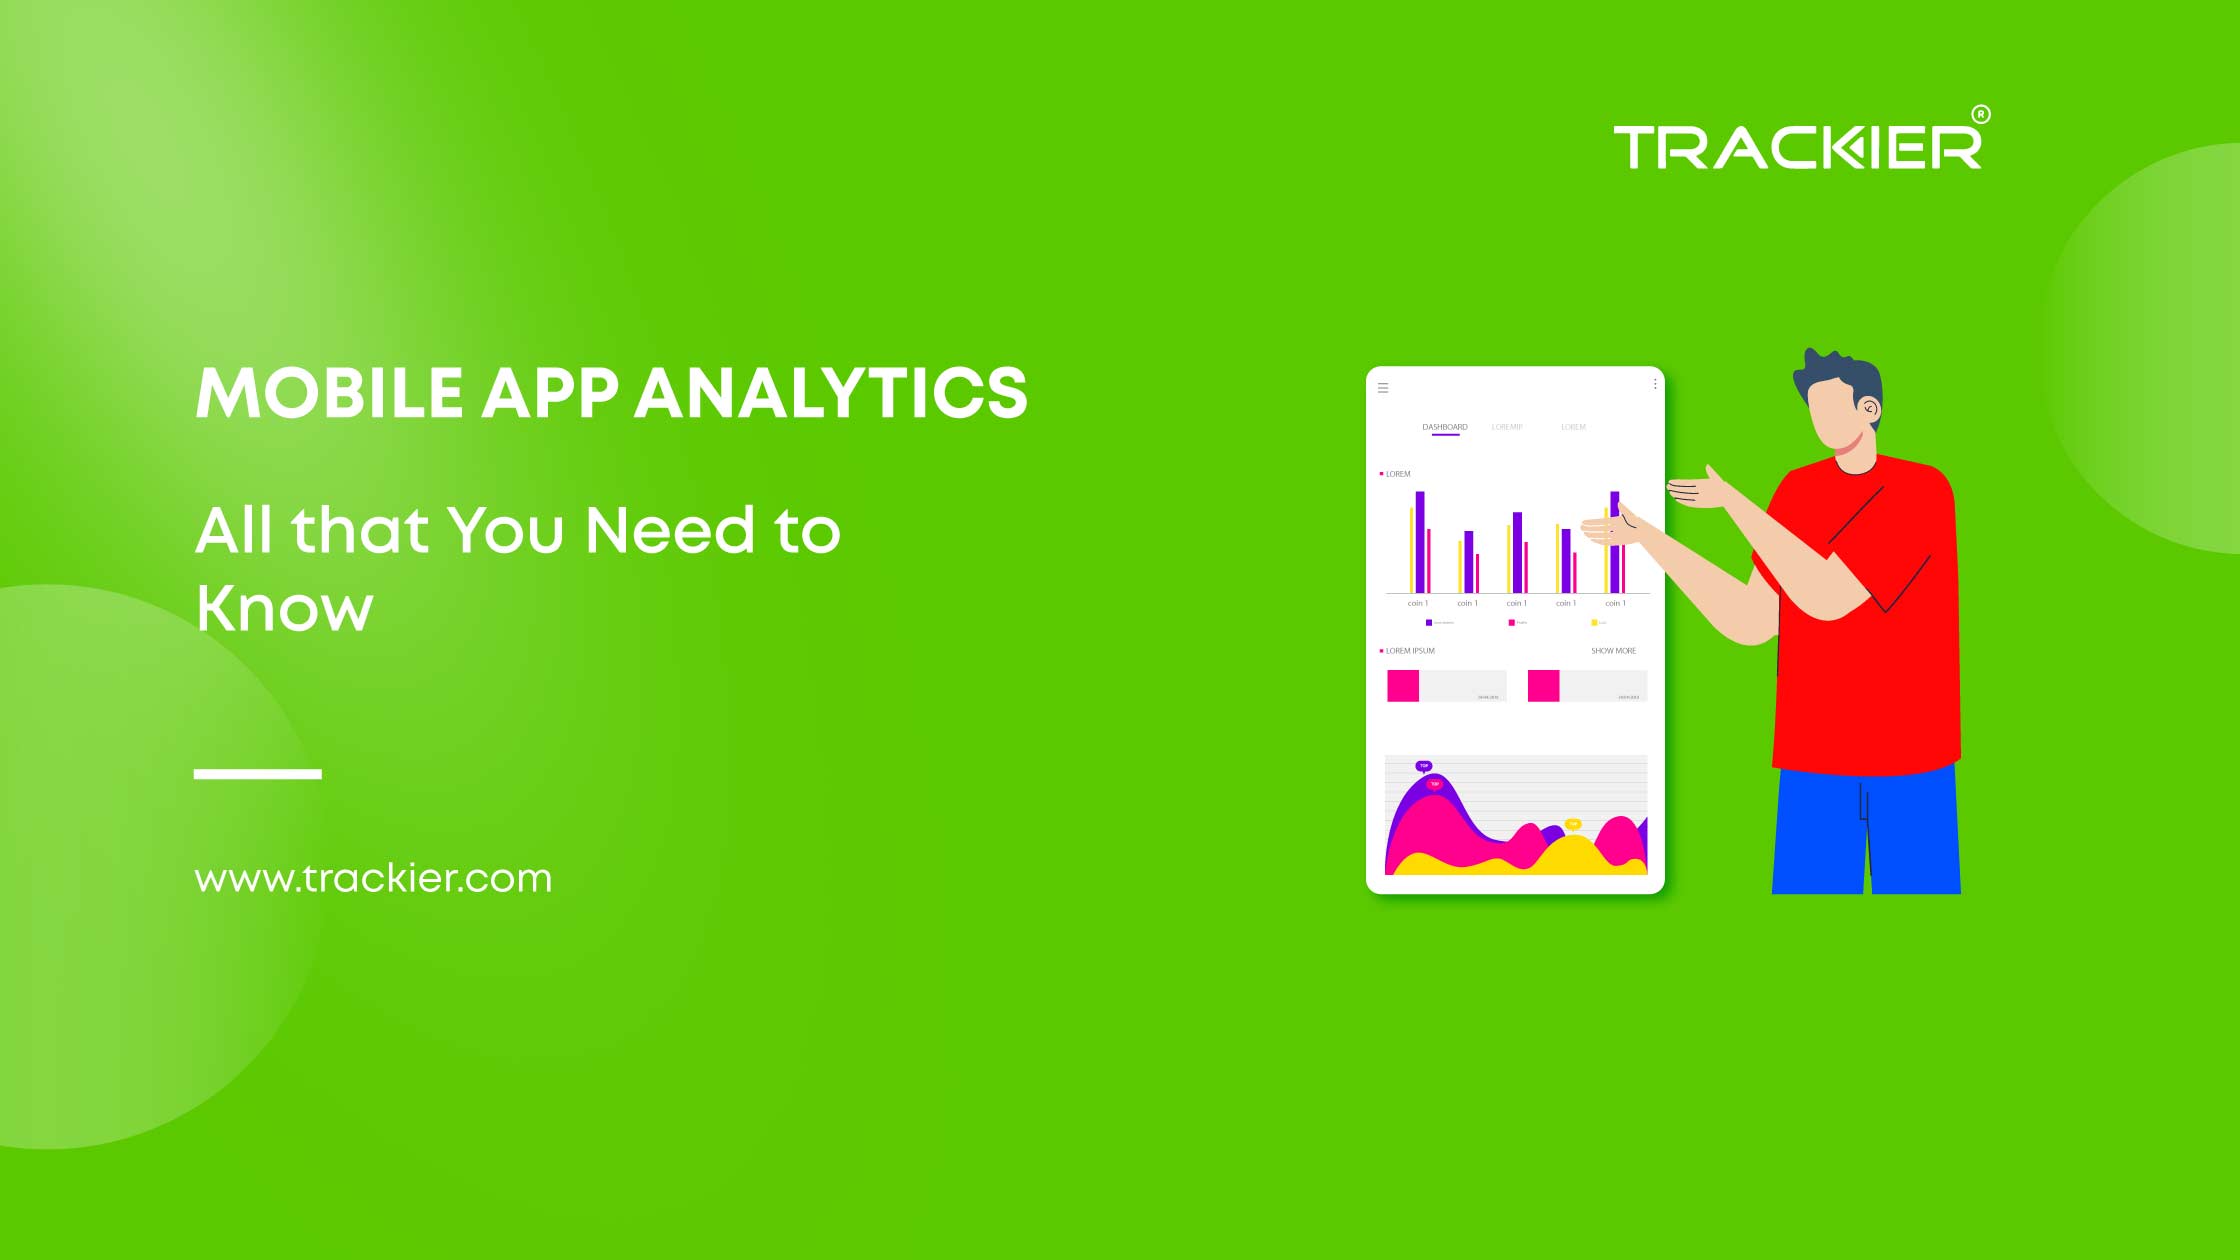 Data-driven decisions for your mobile app's growth